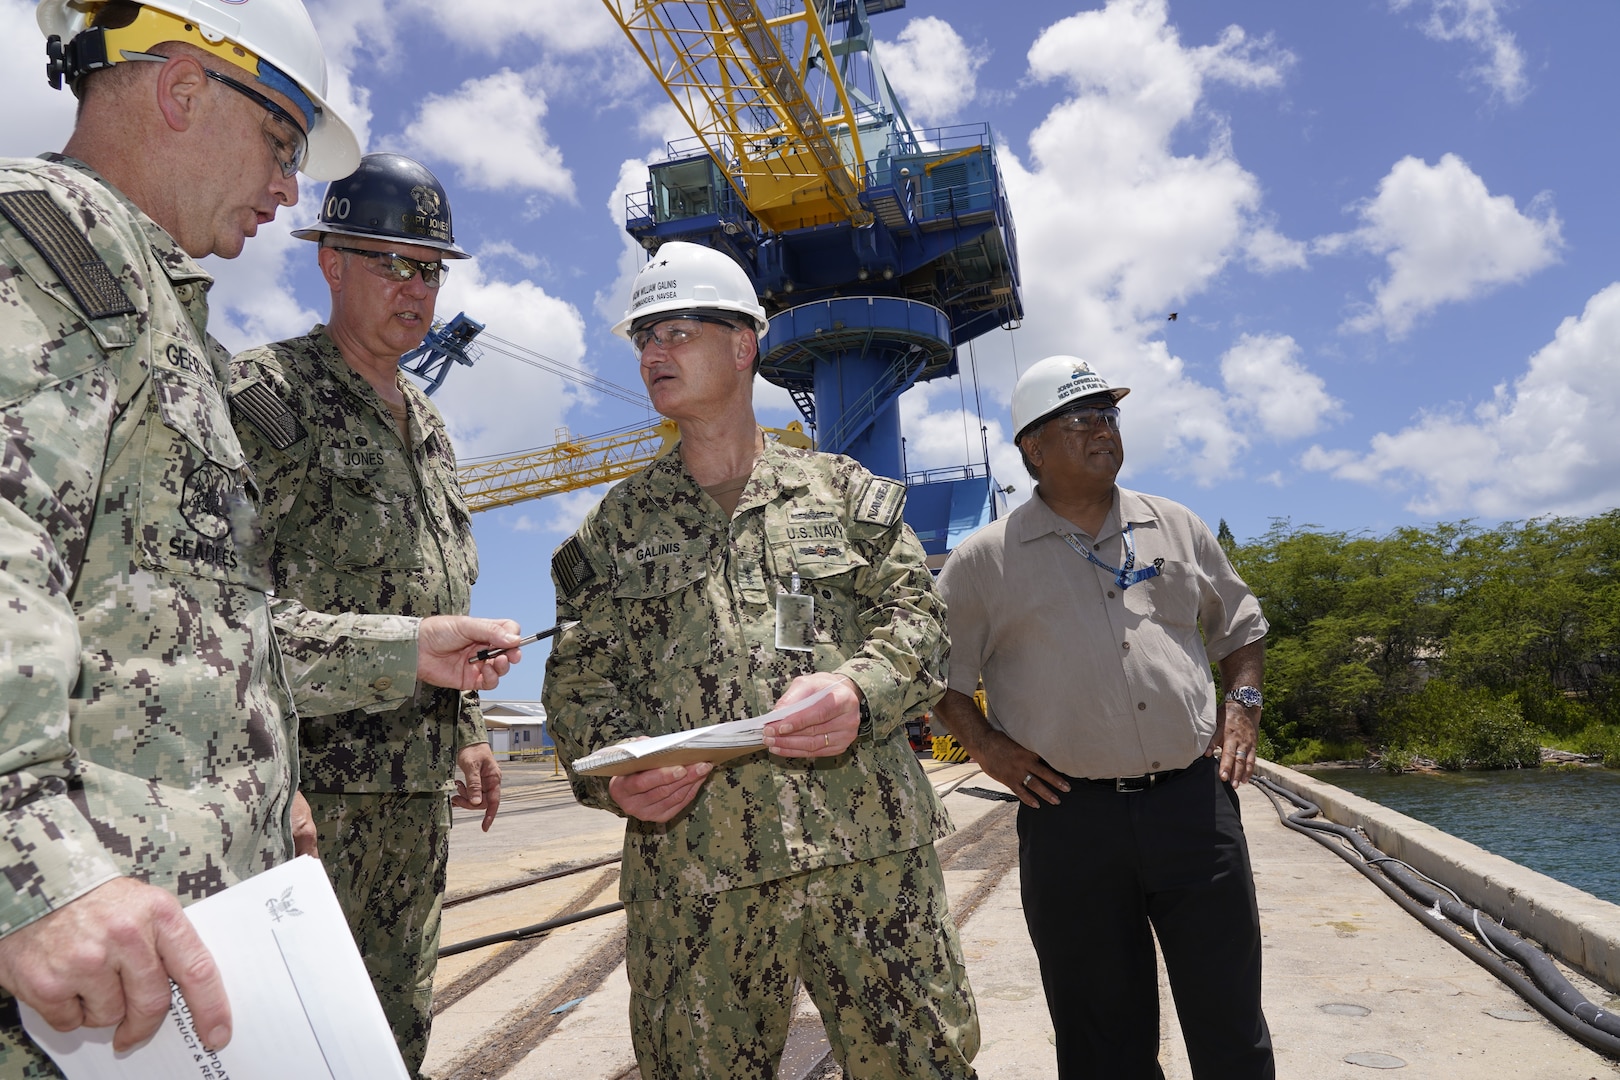 Vice Adm. Bill Galinis (third from left), Commander of Naval Sea Systems Command, visits with leadership from Pearl Harbor Naval Shipyard and Intermediate Maintenance Facility in May, to assess the command’s alignment and progress on implementing the U.S. Navy’s Naval Sustainment System – Shipyard performance improvement initiatives while conducting a review of shipyard operations in Hawaii. (Official U.S. Navy photo by Marc Ayalin)